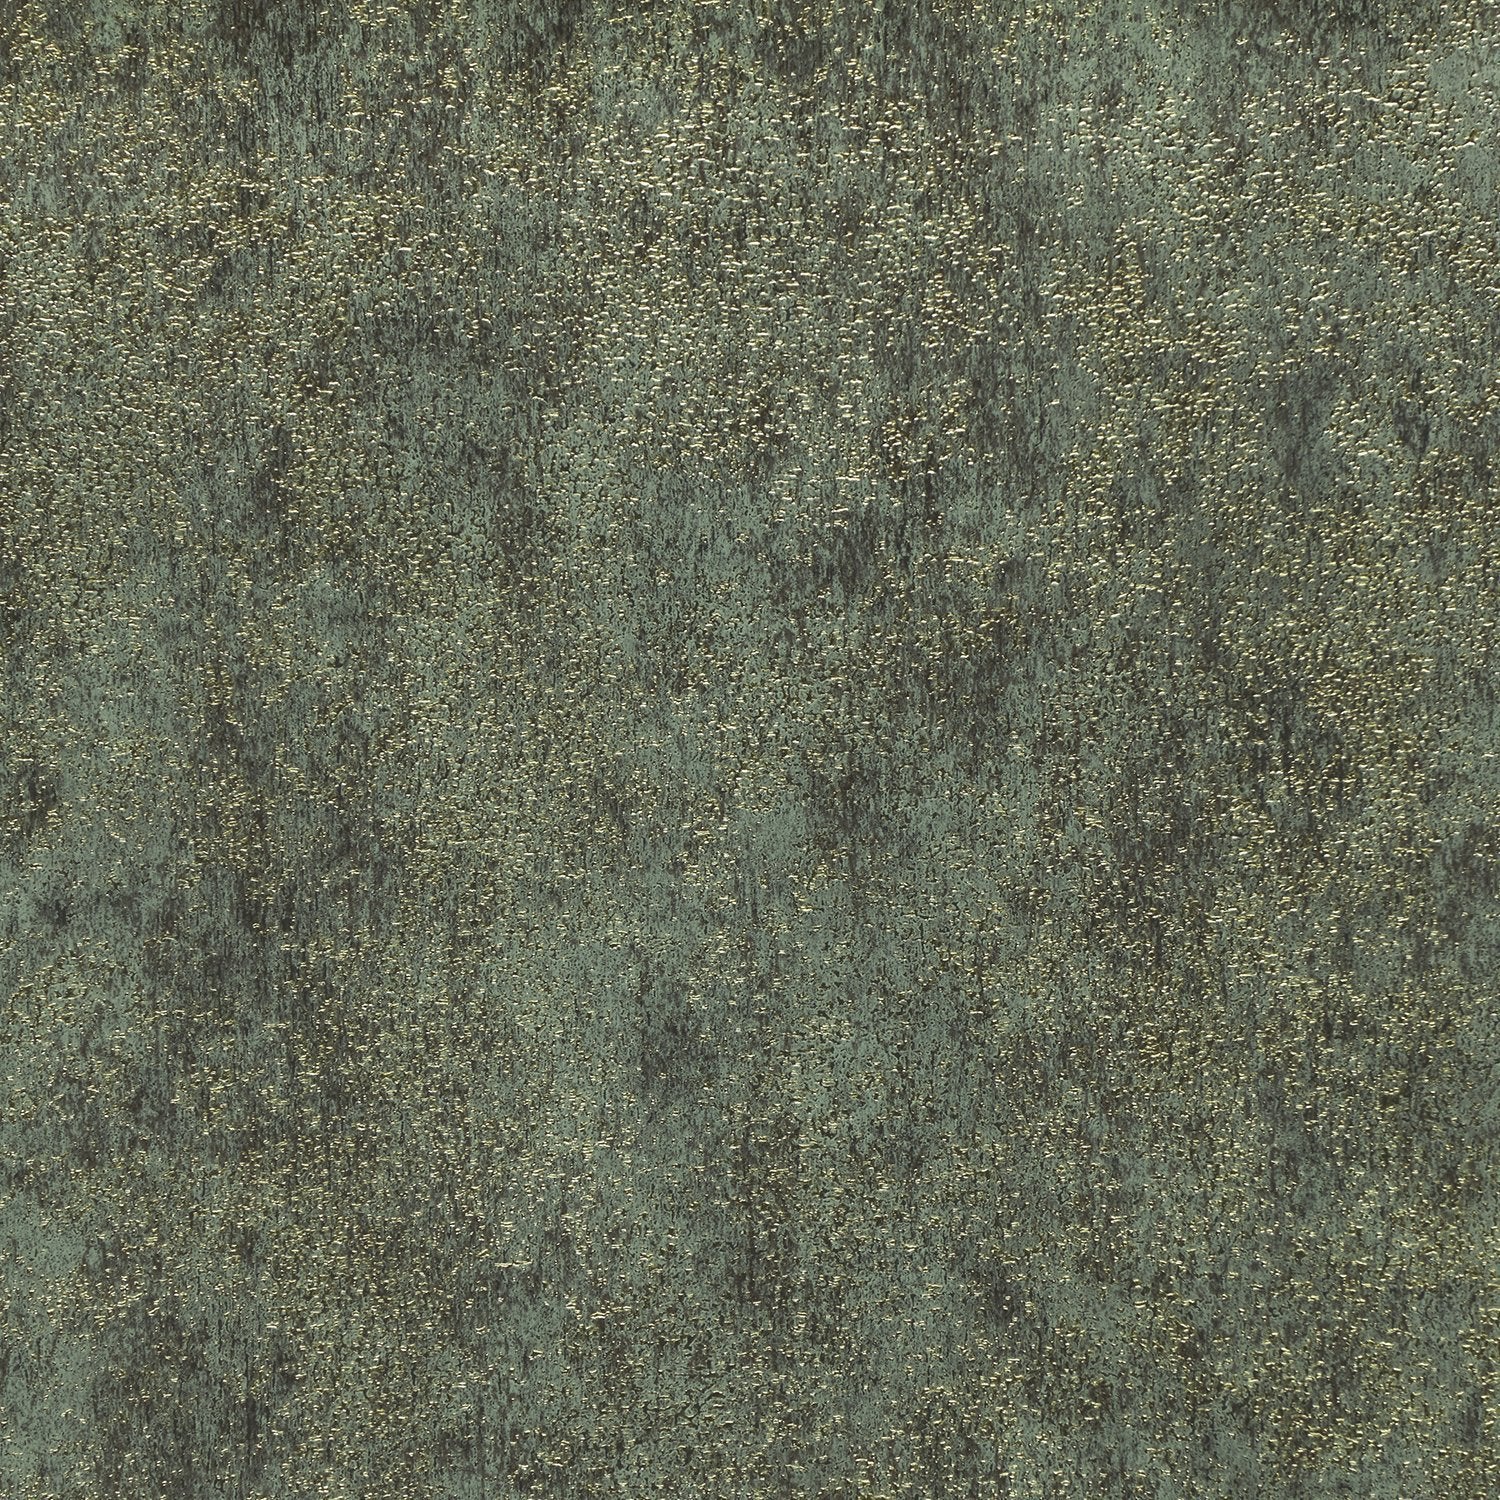 Patina Stone - Y47477 - Wallcovering - Vycon - Kube Contract